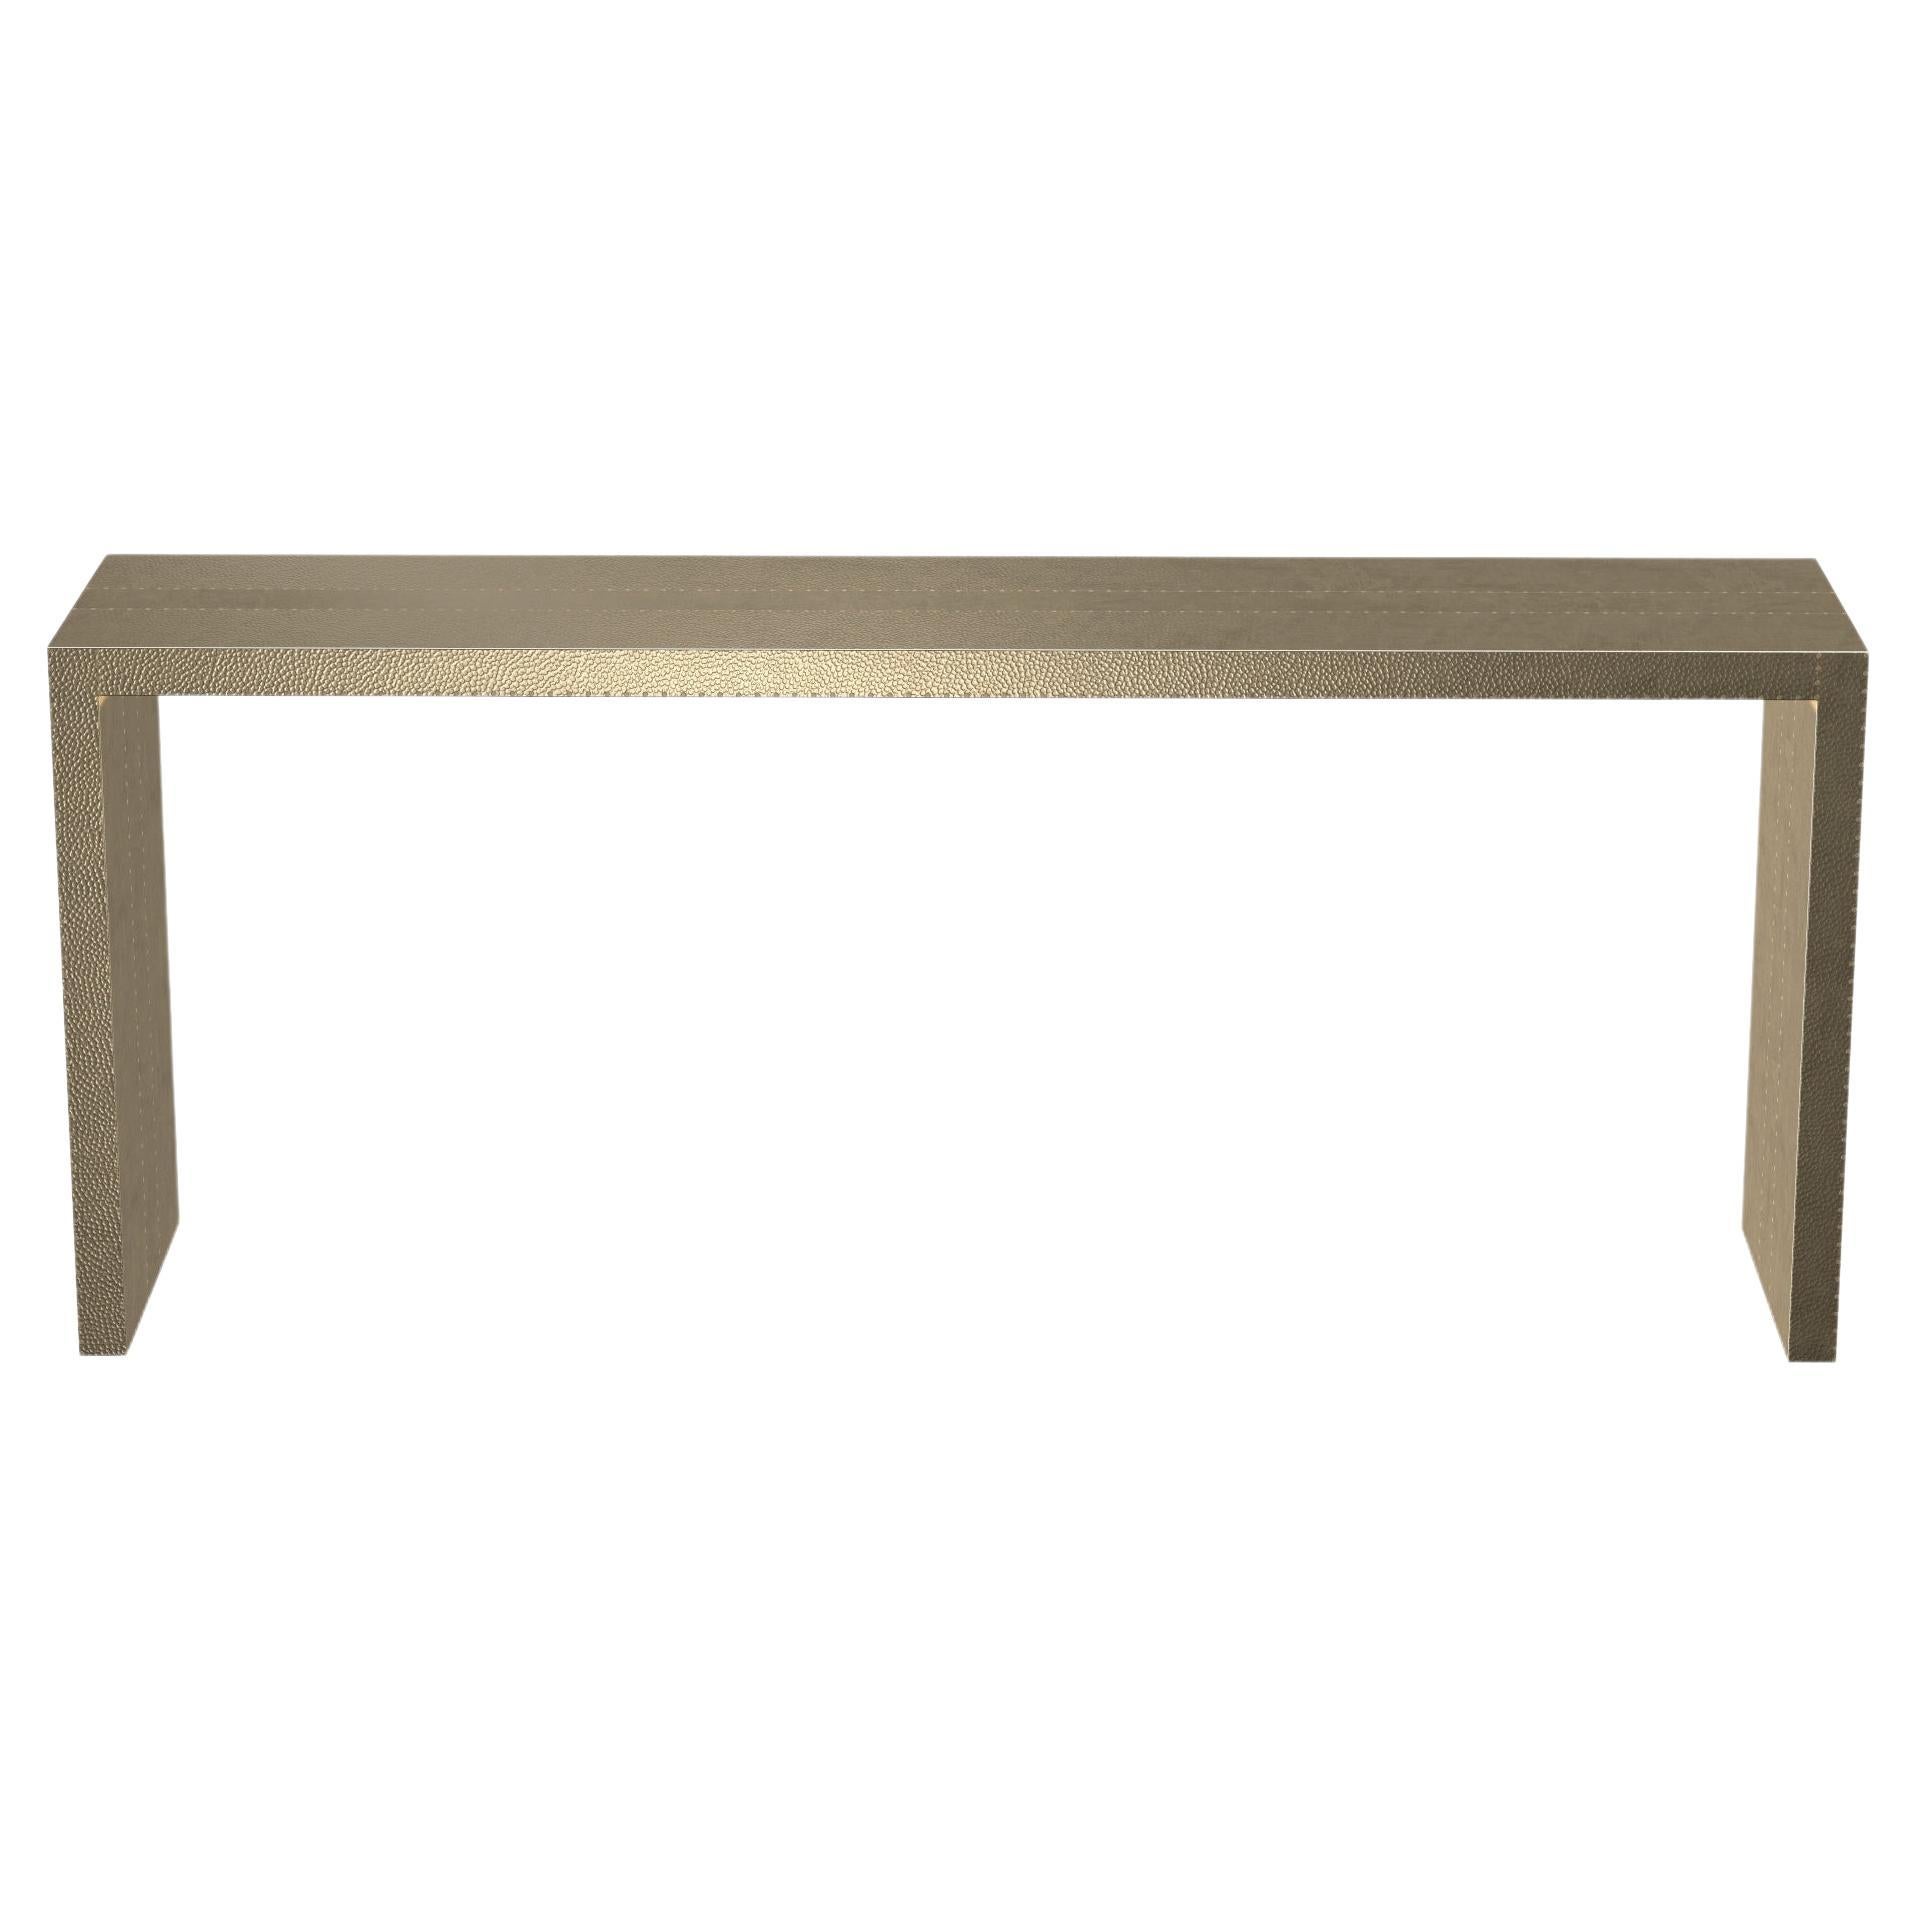 Art Deco Conference Console Tables Mid. Hammered in Brass by Alison Spear For Sale